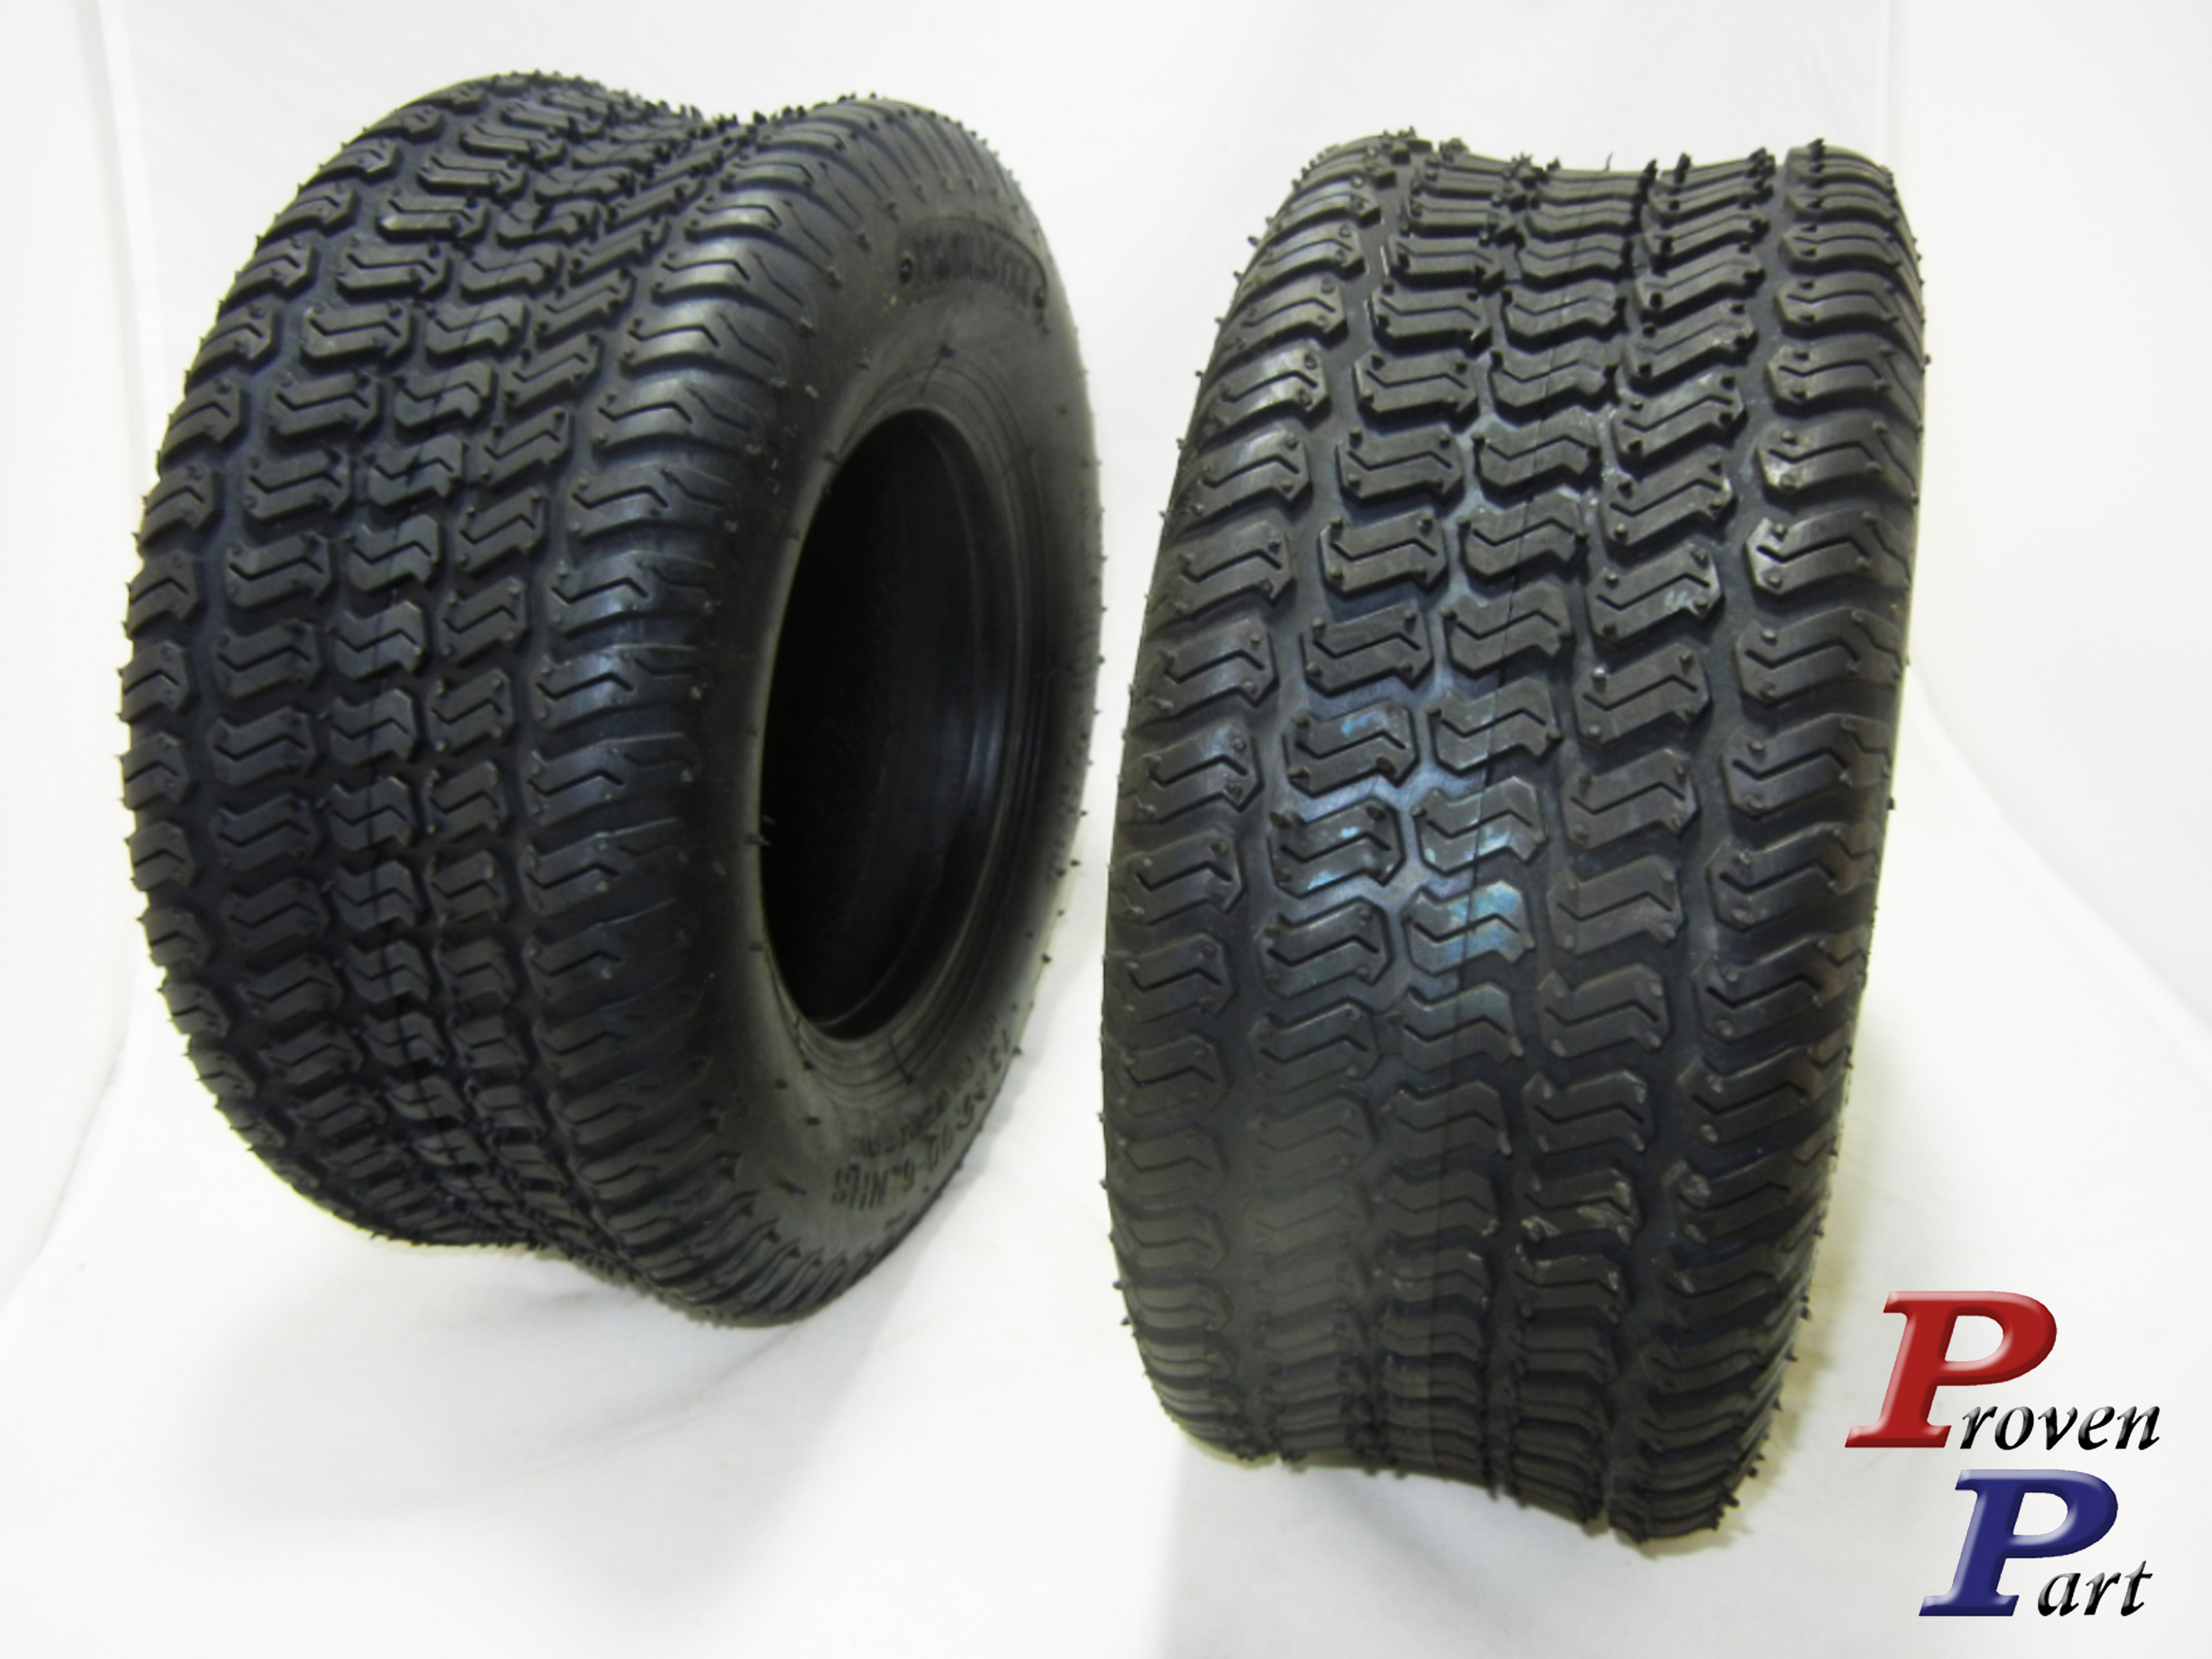 Set of 2 lawn mower tires PROMASTER 13X5.00-6 505 tubeless